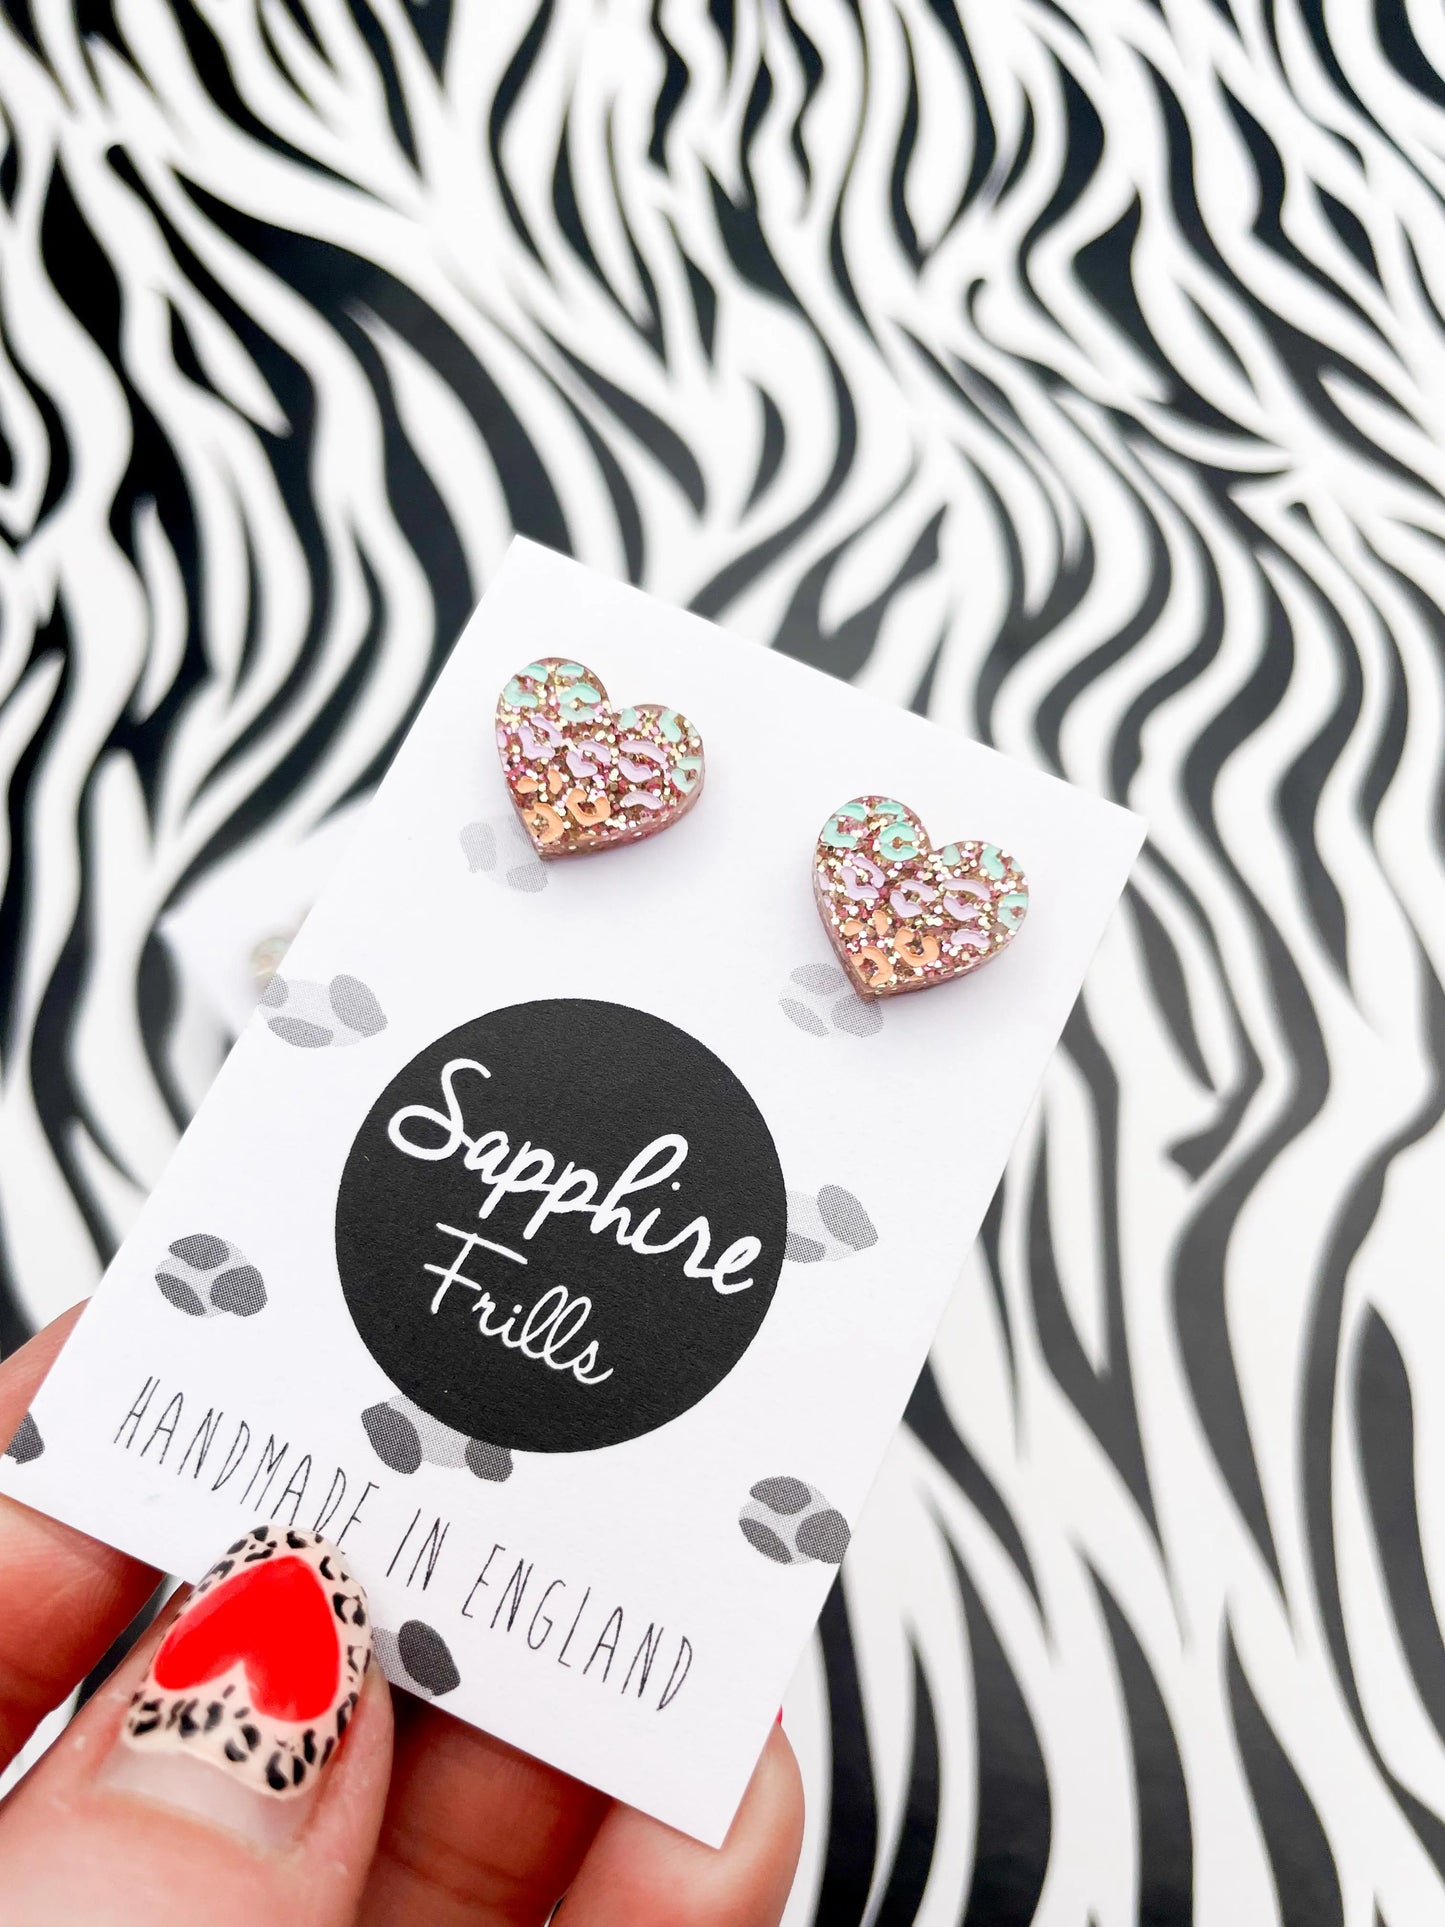 Small Rose Glitter, Mint, Lilac and Peach Leopard Print Acrylic Heart Studs from Sapphire Frills